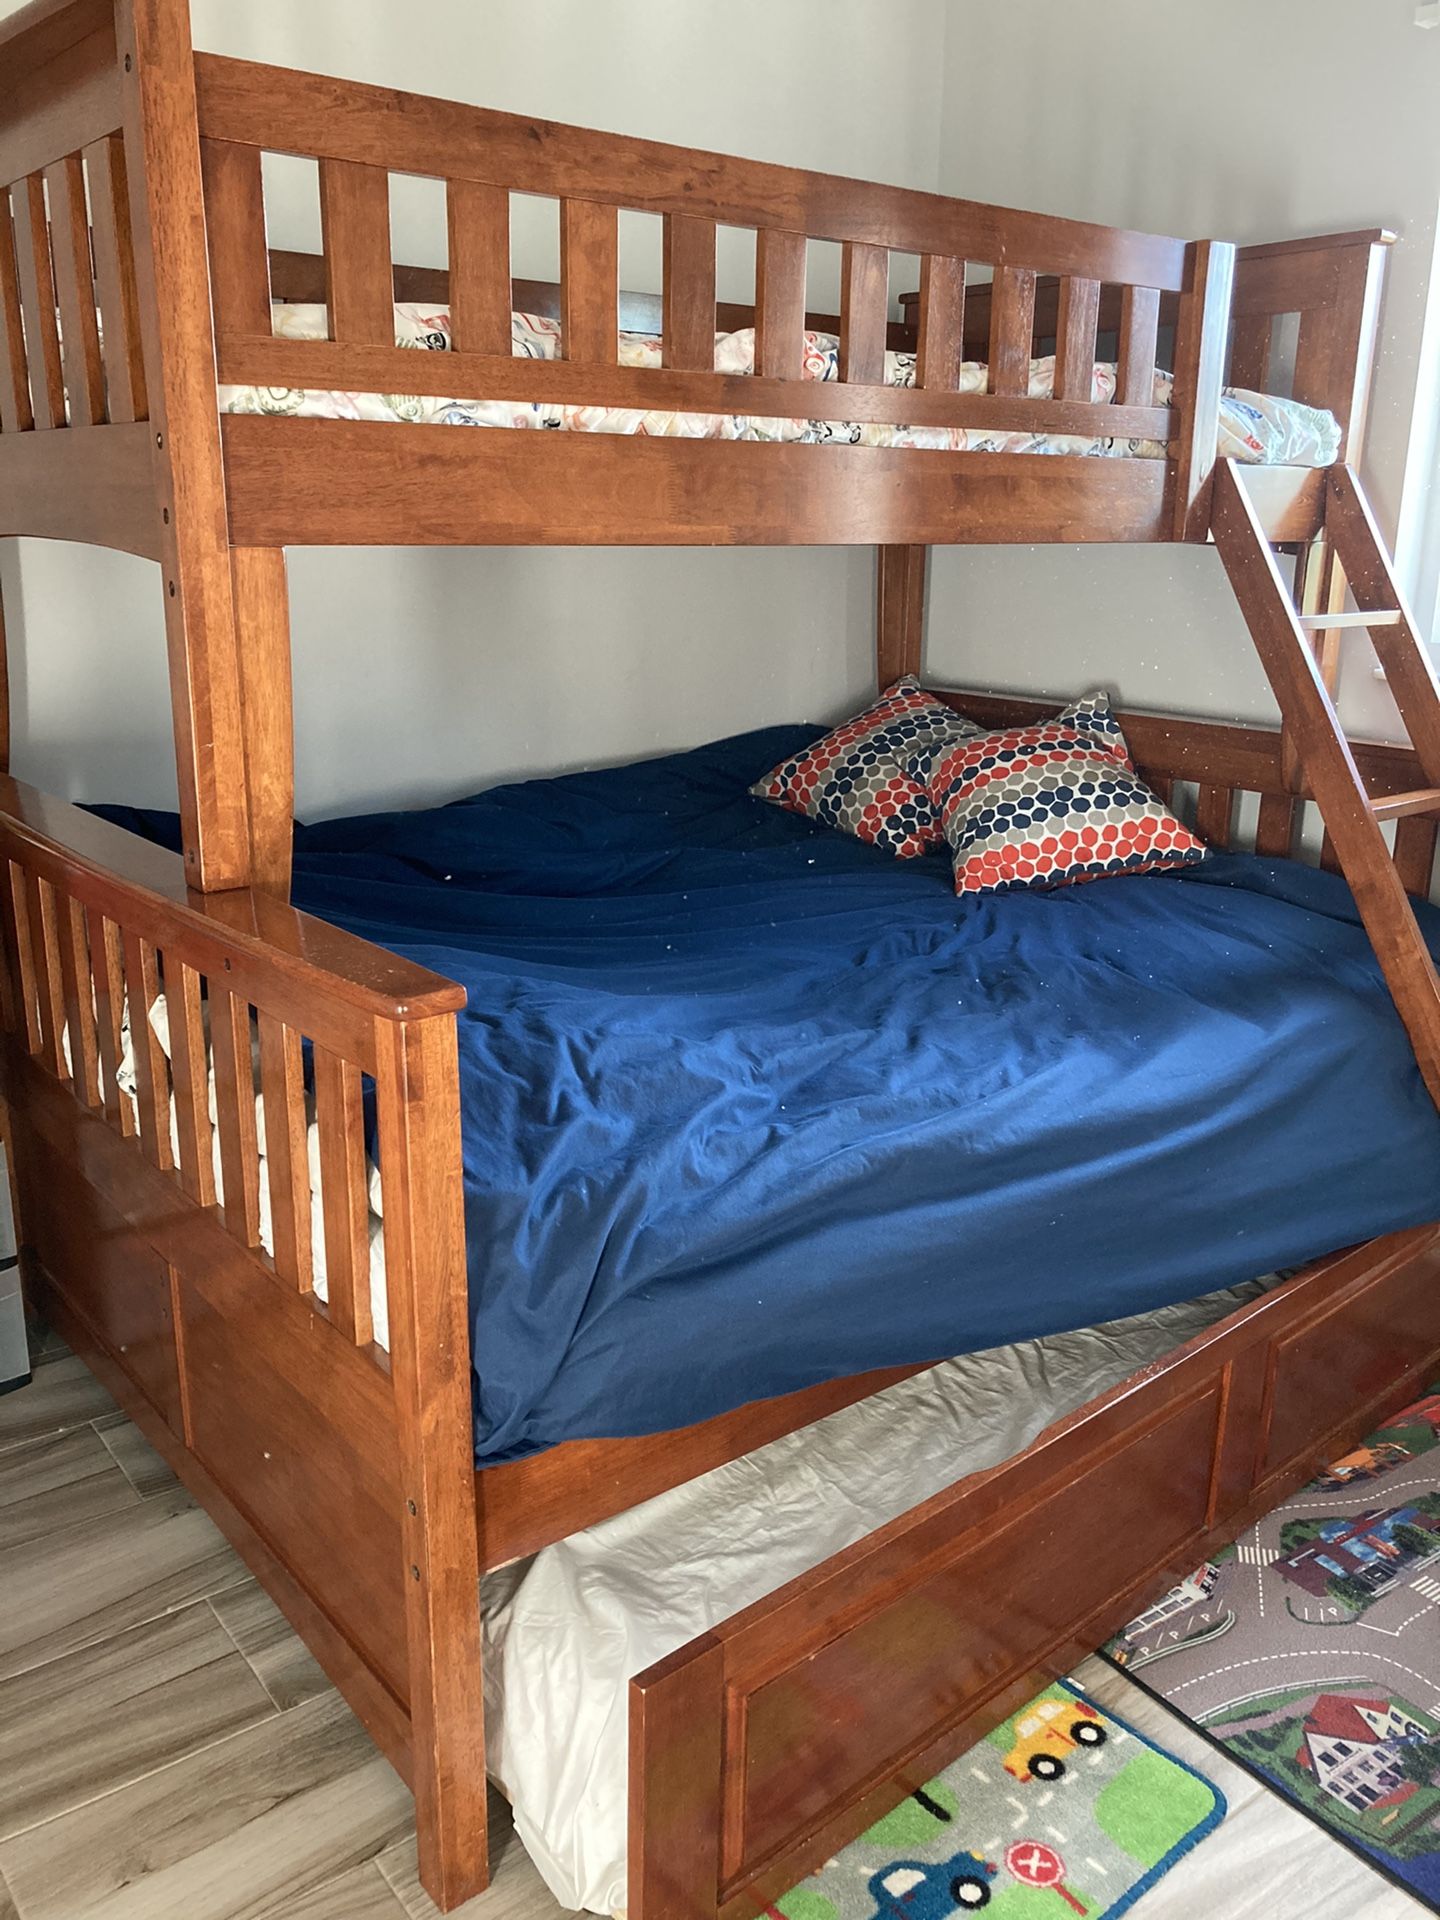 BUNK BED (3 beds) WITH 1 full mattress and 1 twin.